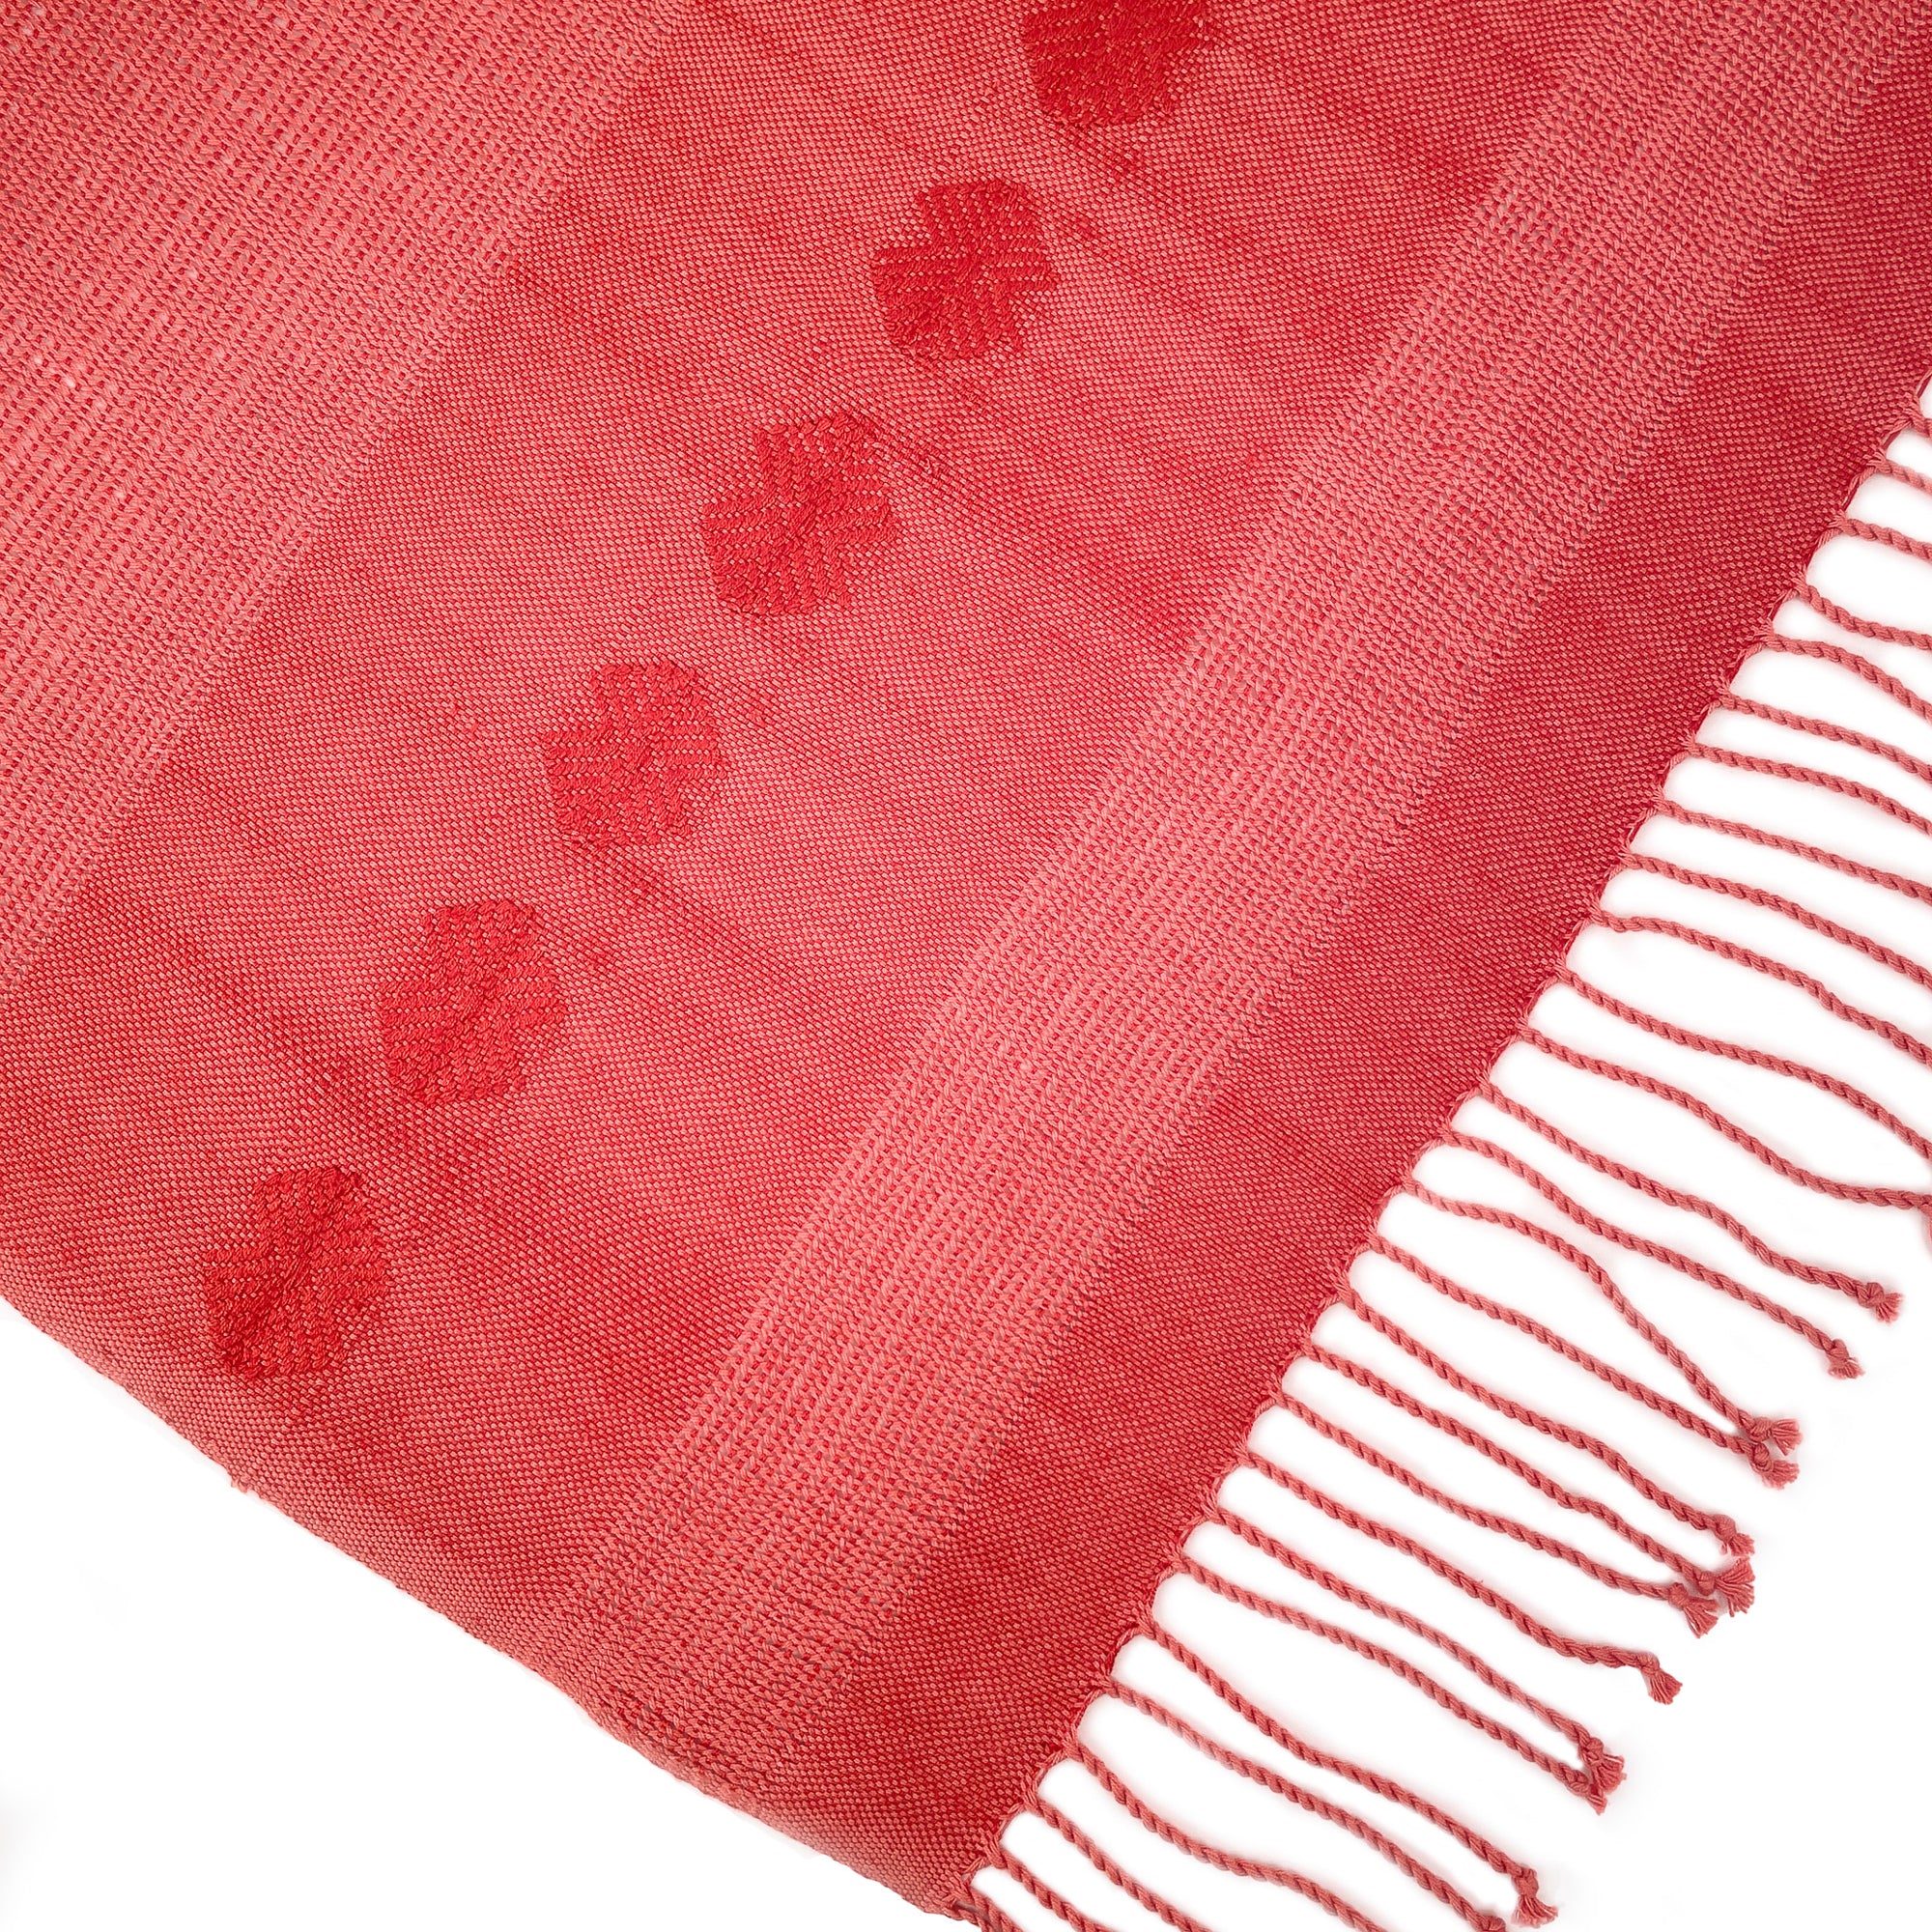 Flatlay photo of coral colored shawl with hand knotted fringe and brocade detail